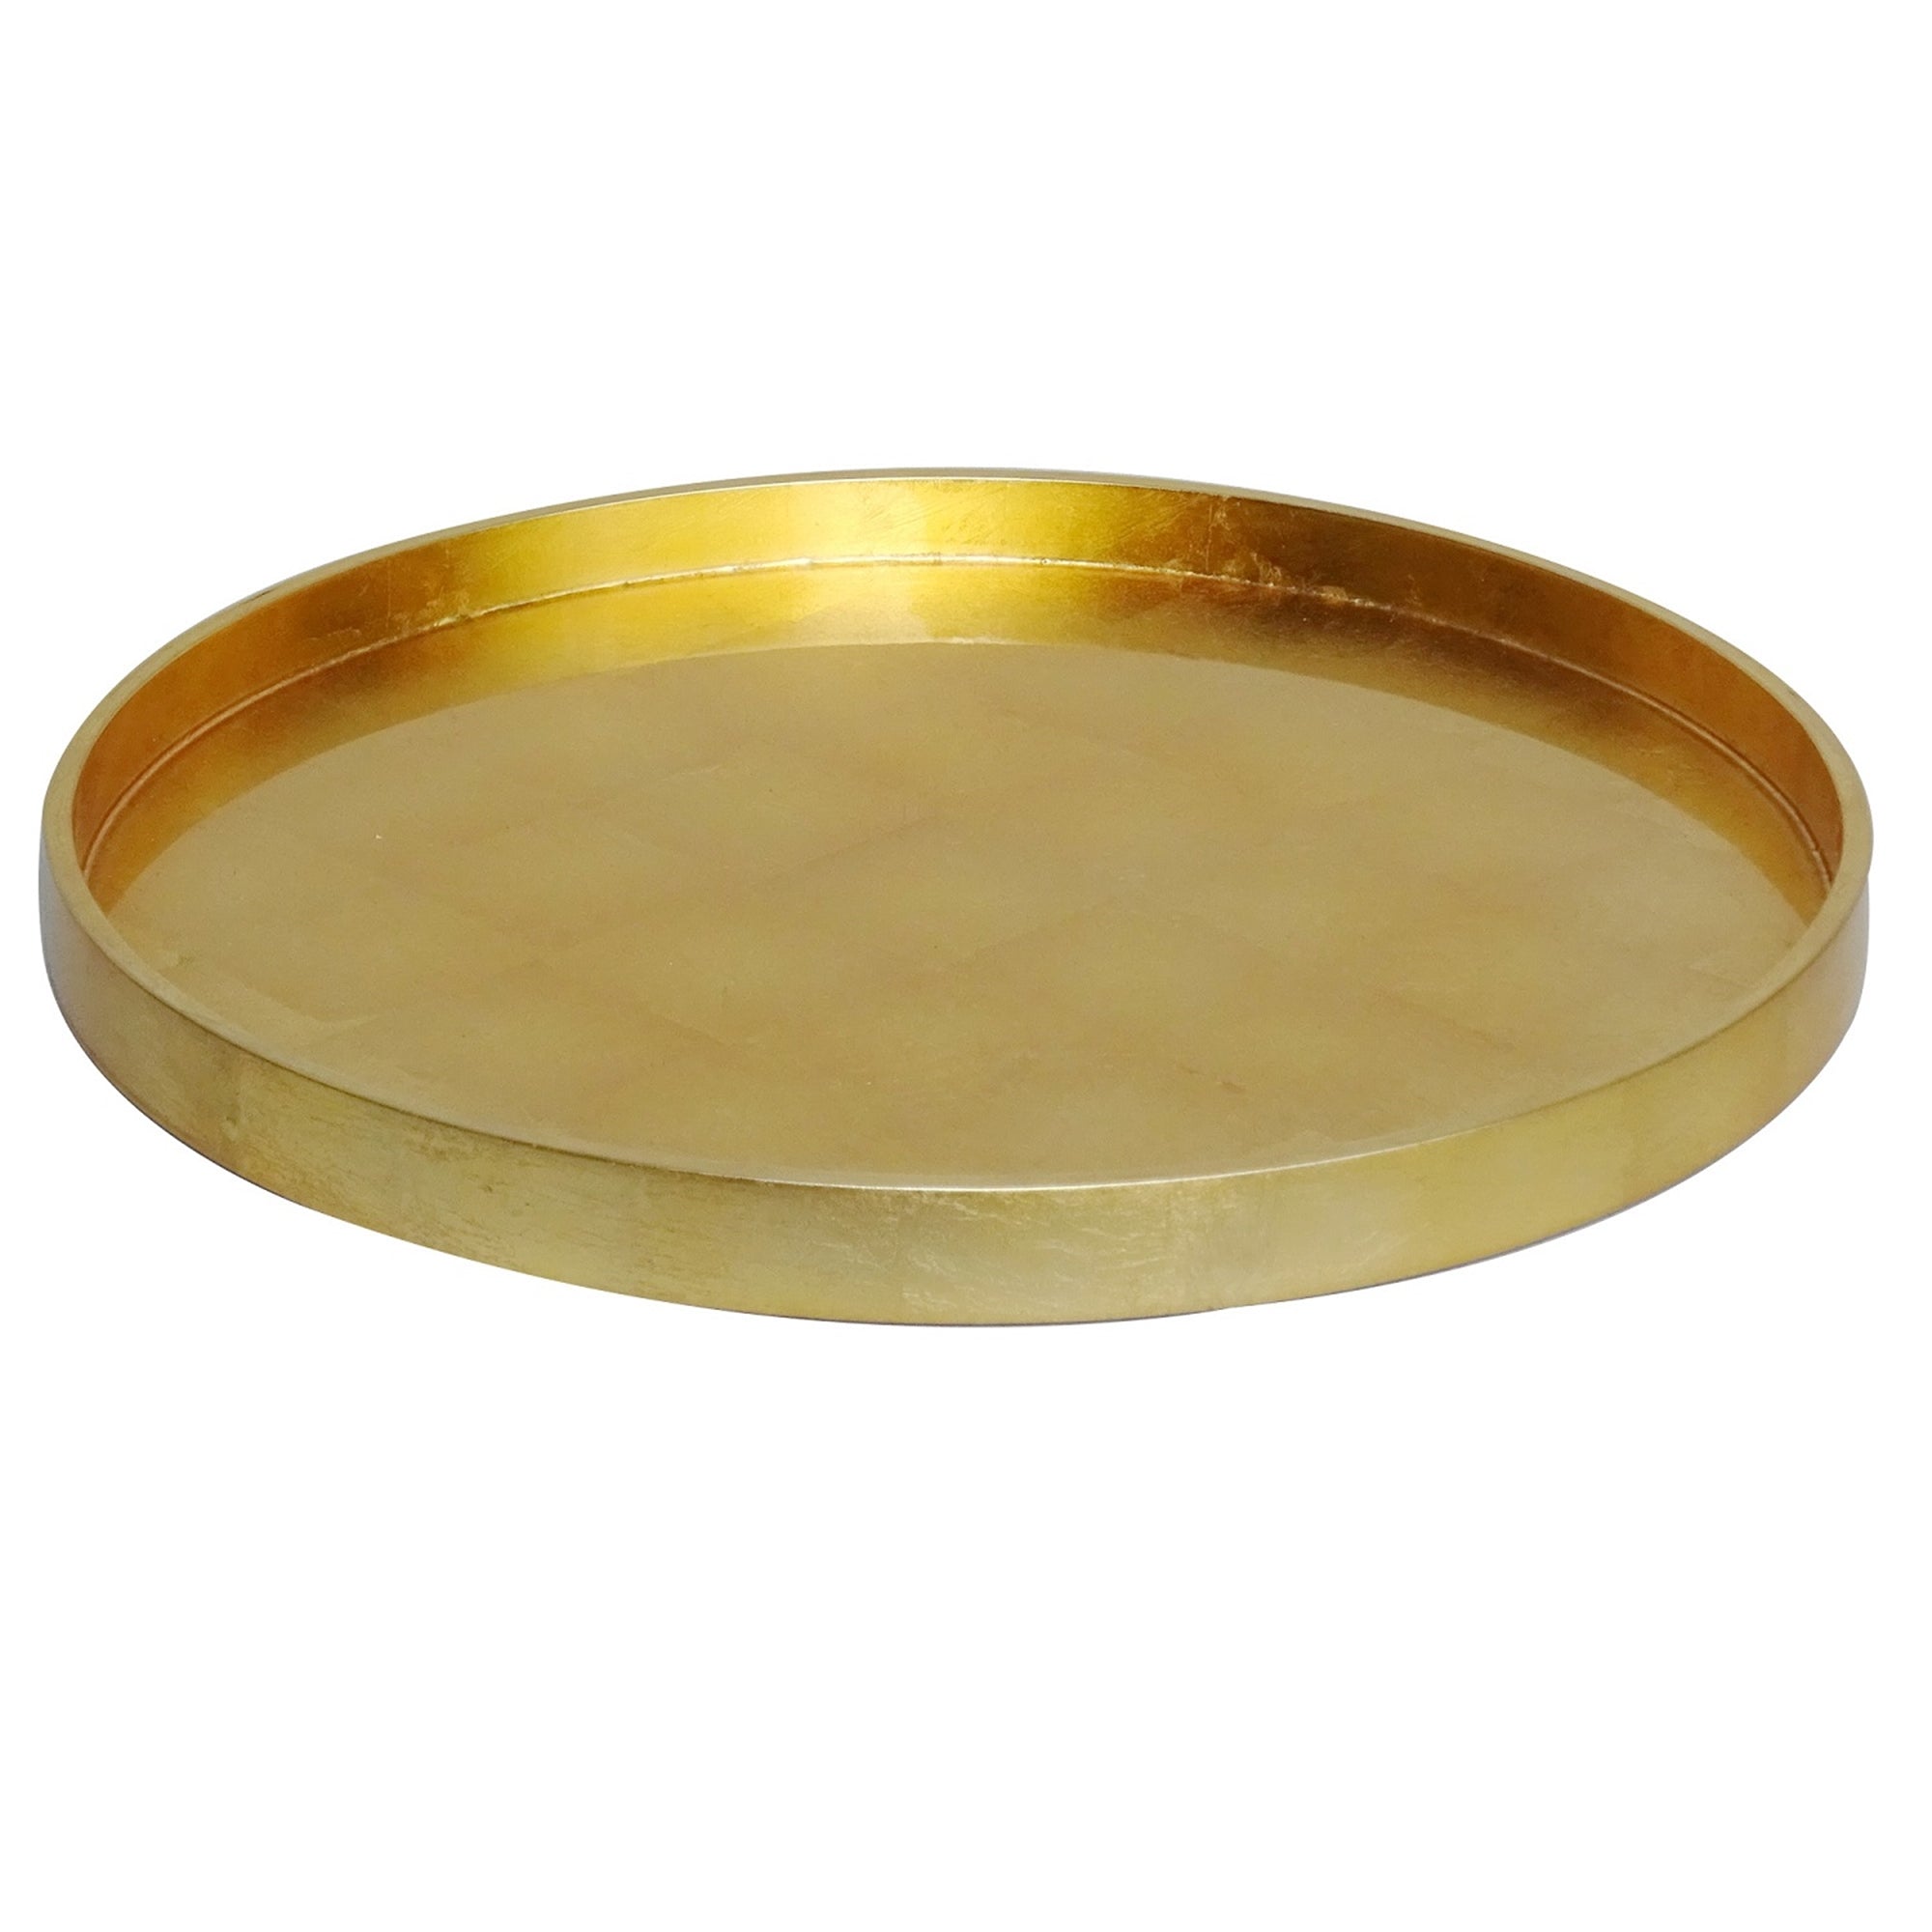 GOLD LEAF LACQUER ROUND SERVING TRAY